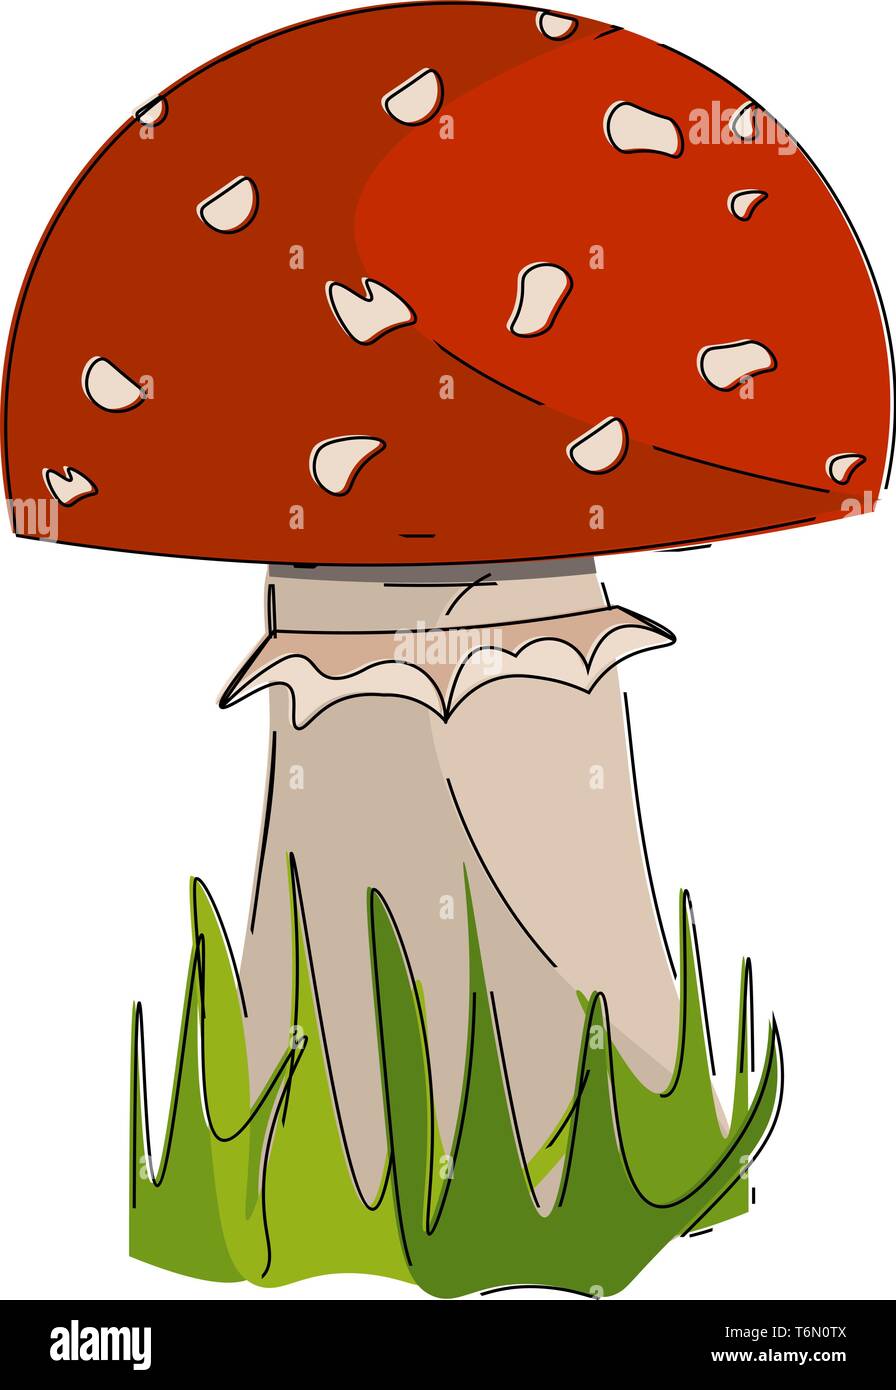 A picture of mushroom in red color vector color drawing or illustration Stock Vector